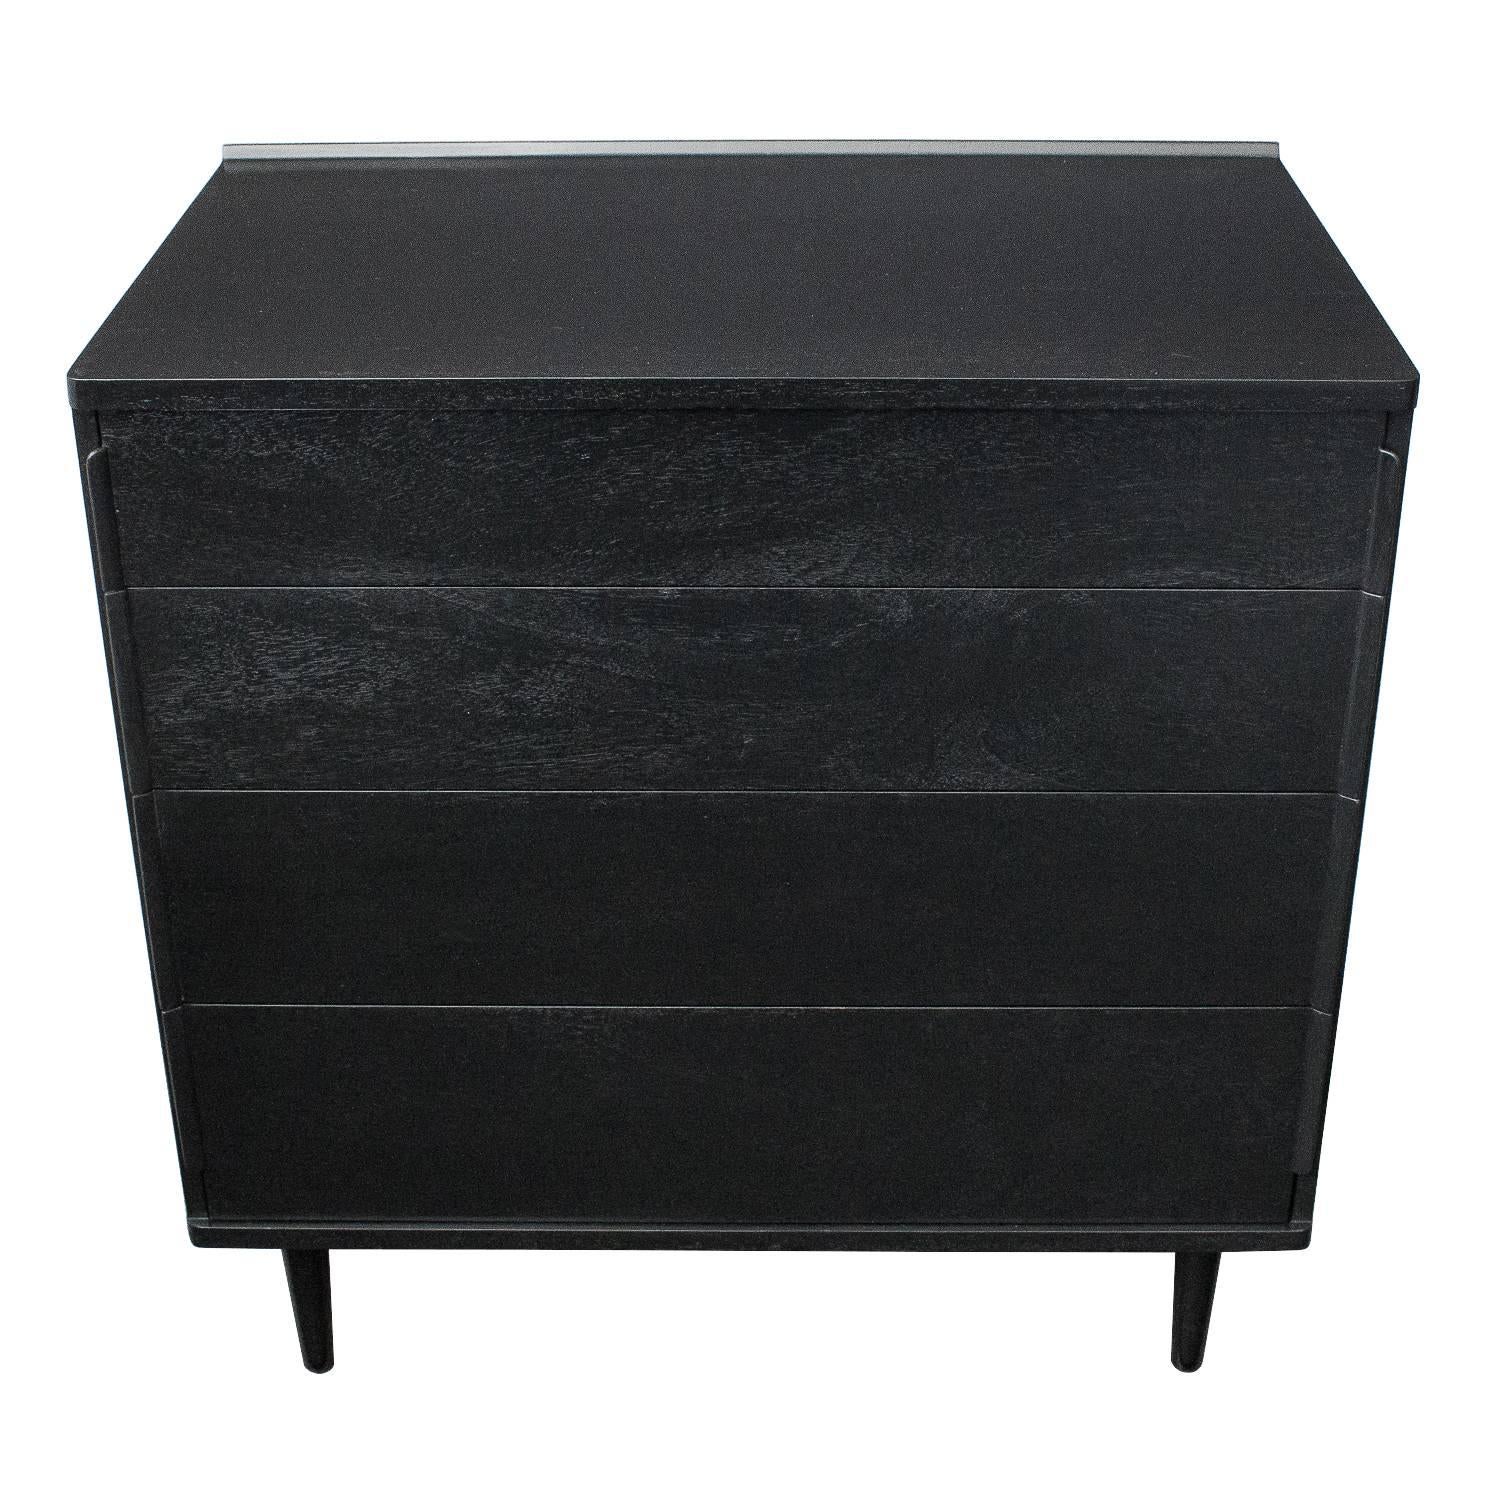 Four-drawer ebonized mahogany chest by Edward Wormley for Dunbar, circa 1950s. Model 5269A. Four drawers with vertical laminated end pulls running the length of the cabinet. Tapered dowel legs. Finished on the back side. Beautiful black ebonized